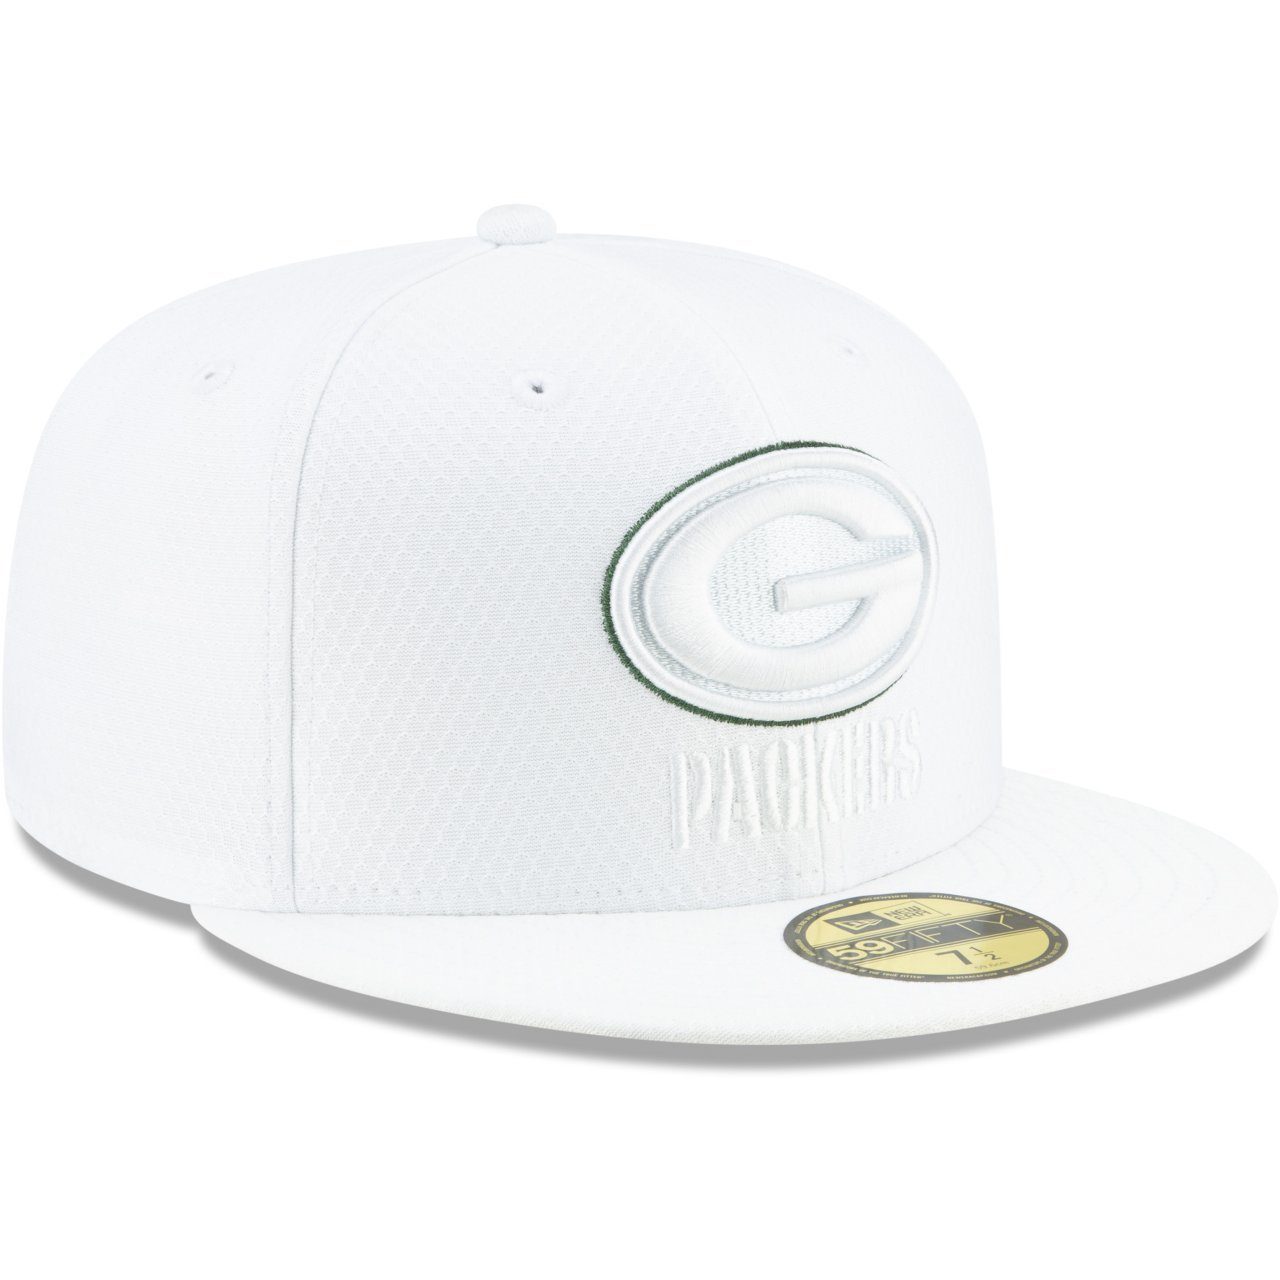 New Era Fitted Cap Packers Green NFL PLATINUM Bay 59Fifty Sideline